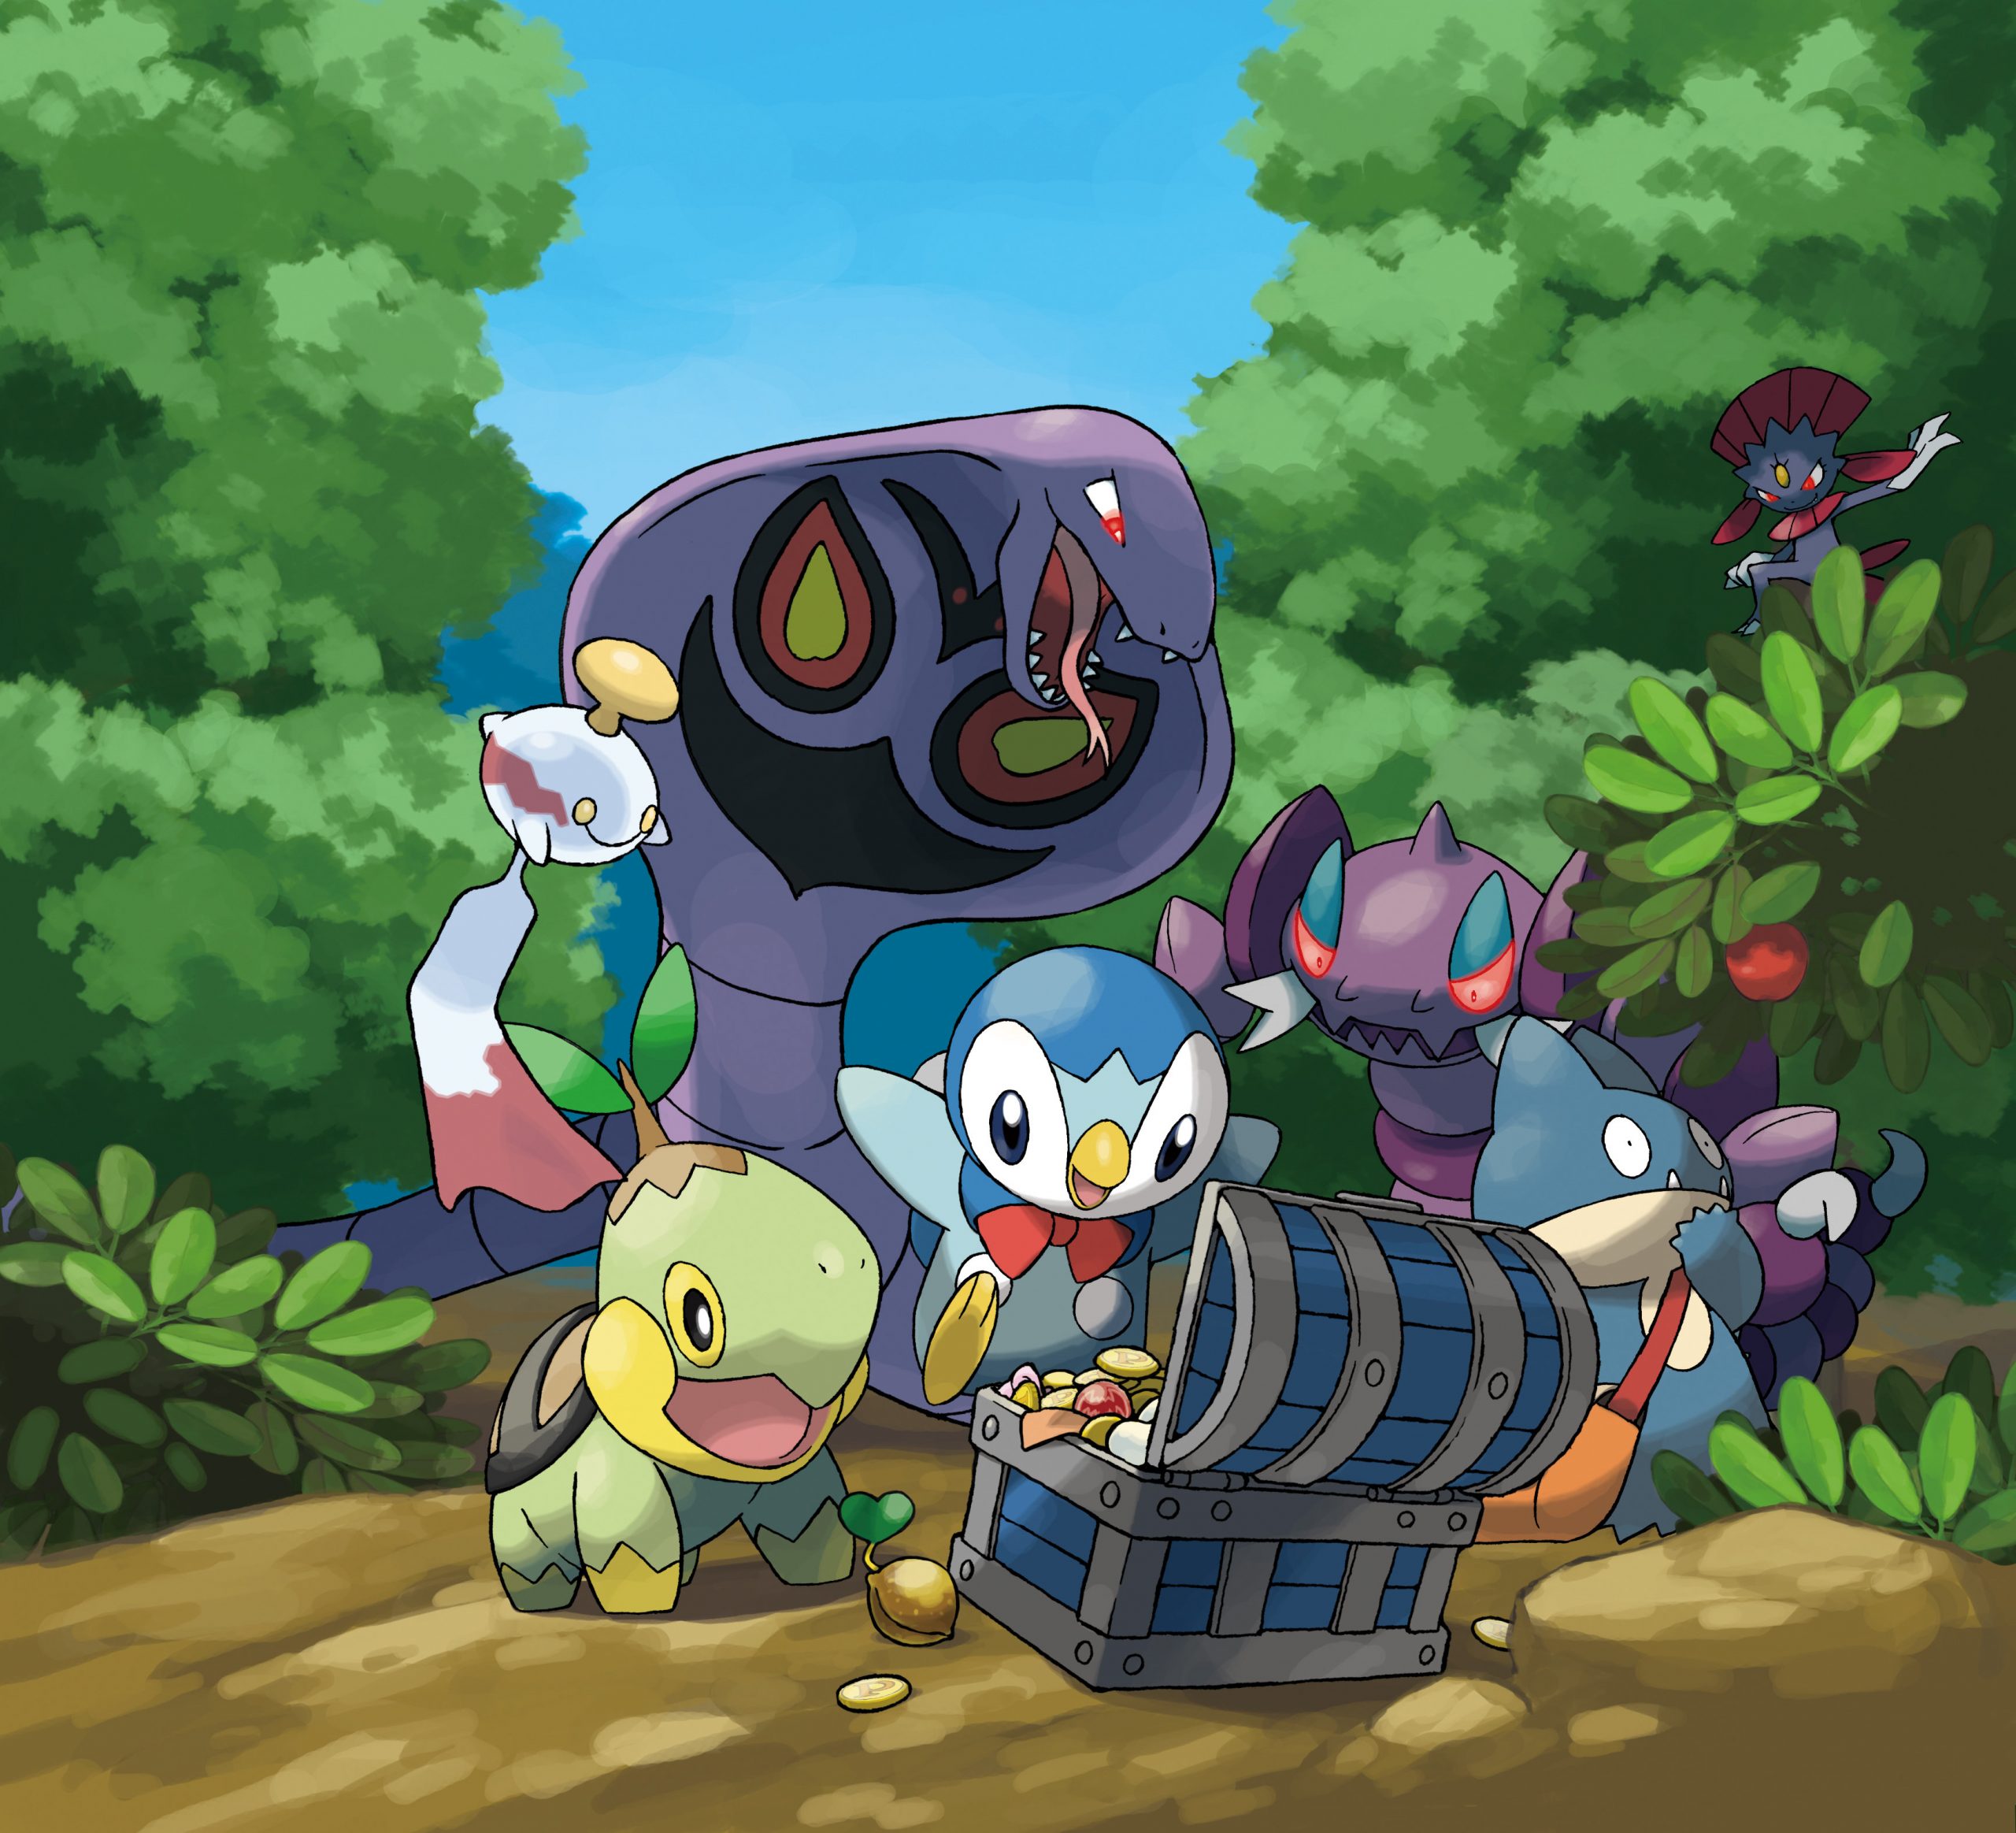 Pokémon Mystery Dungeon: Explorers of Time Details ...